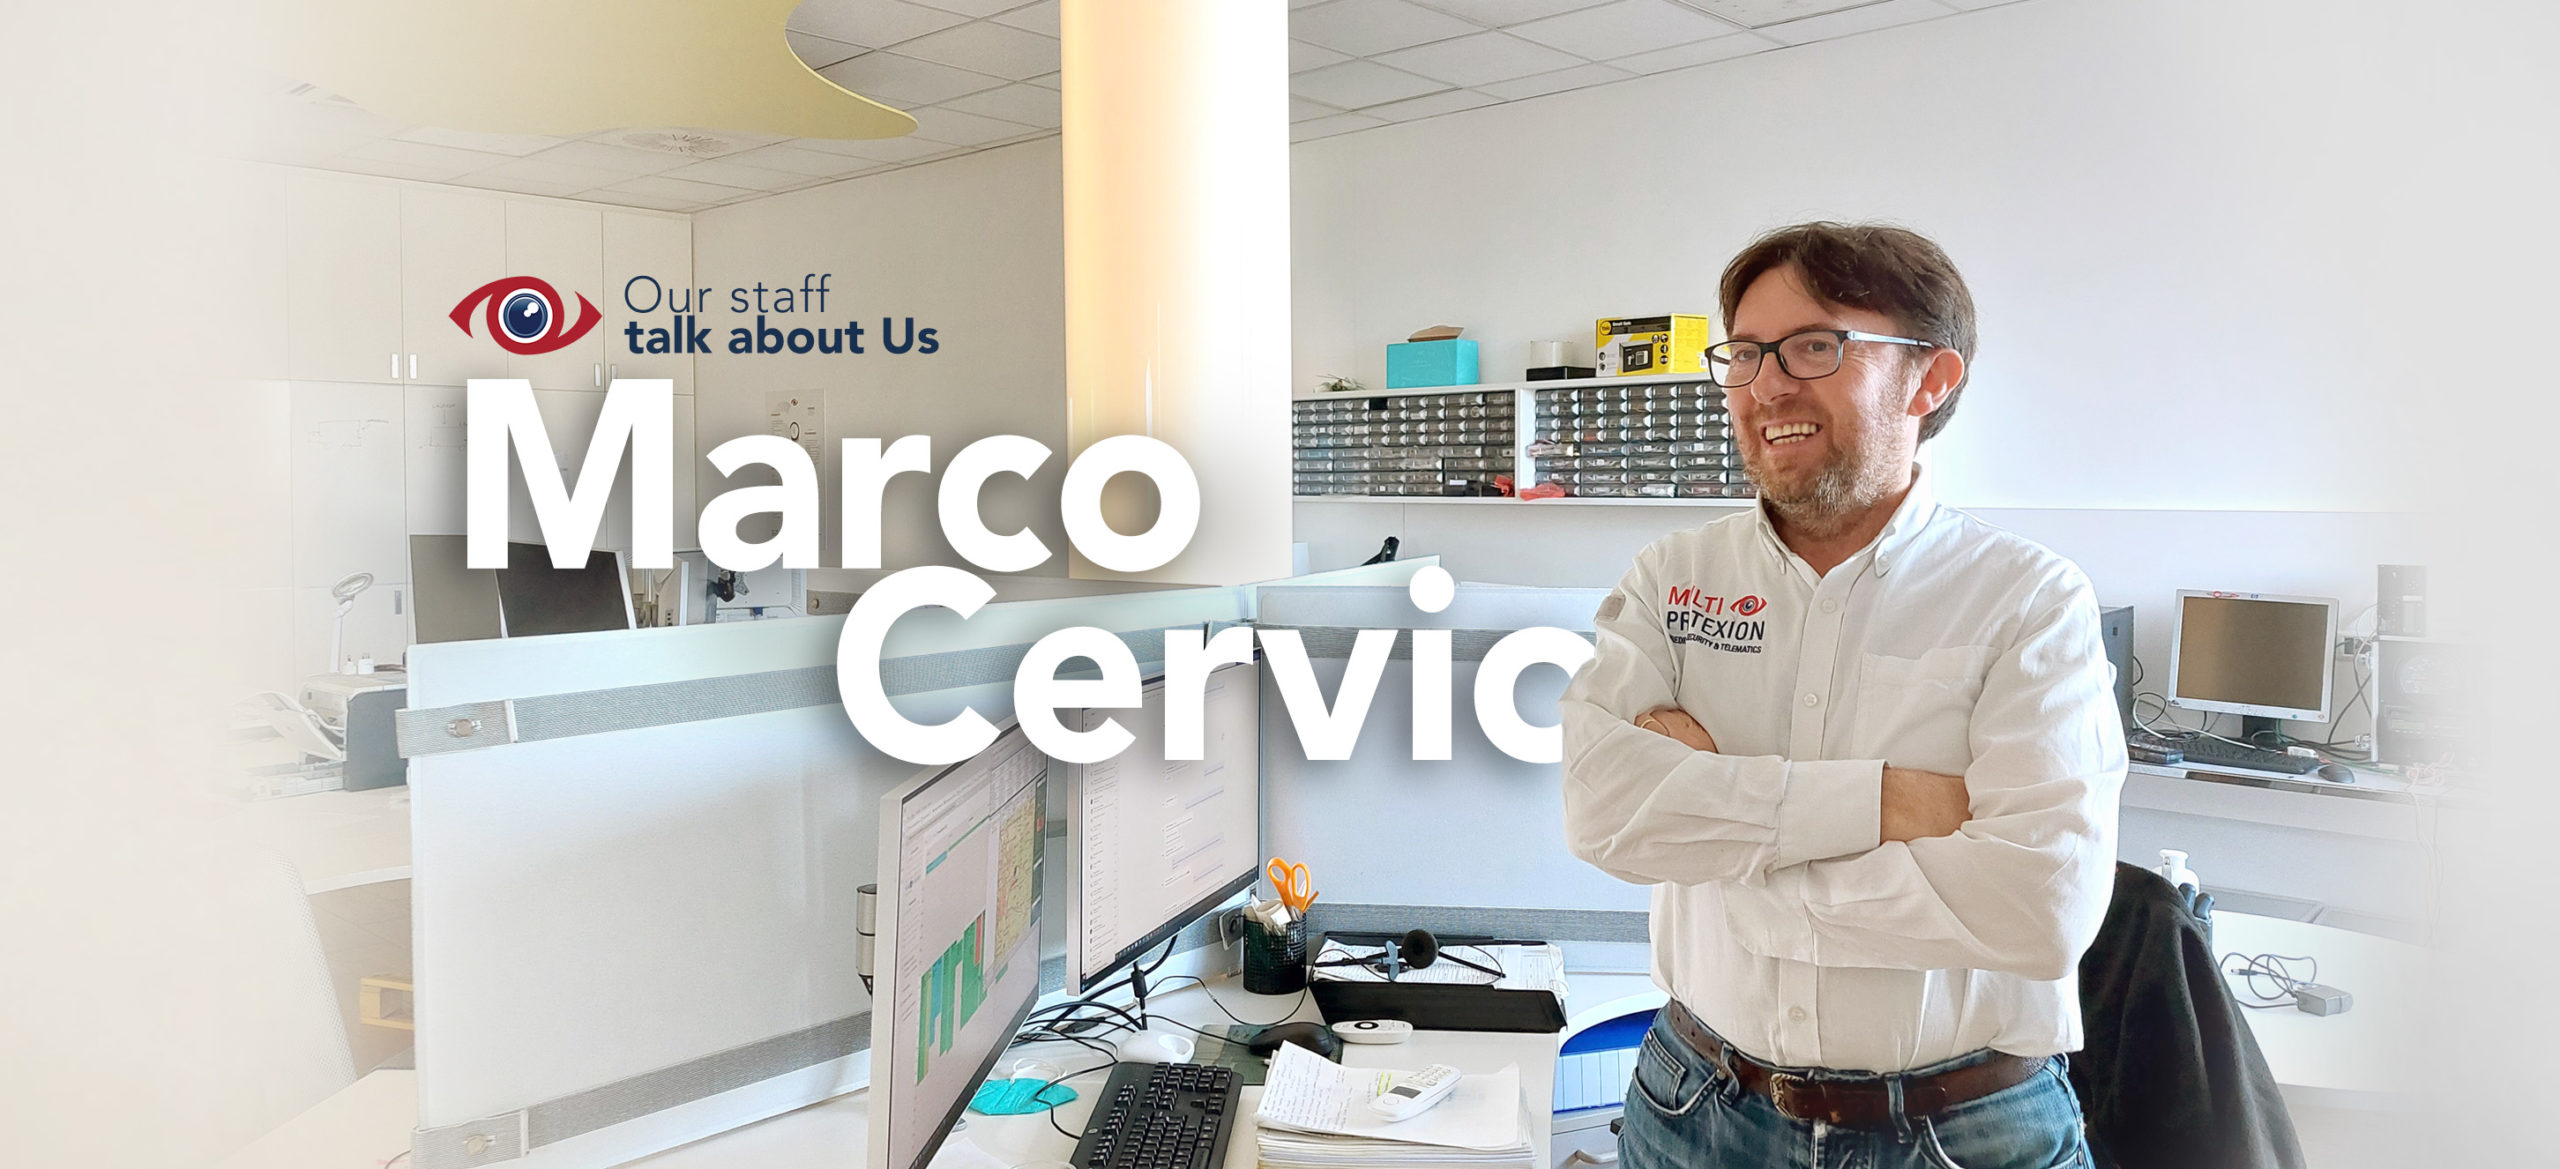 OUR STAFF TALK ABOUT US: MARCO CERVIO SPEAKS